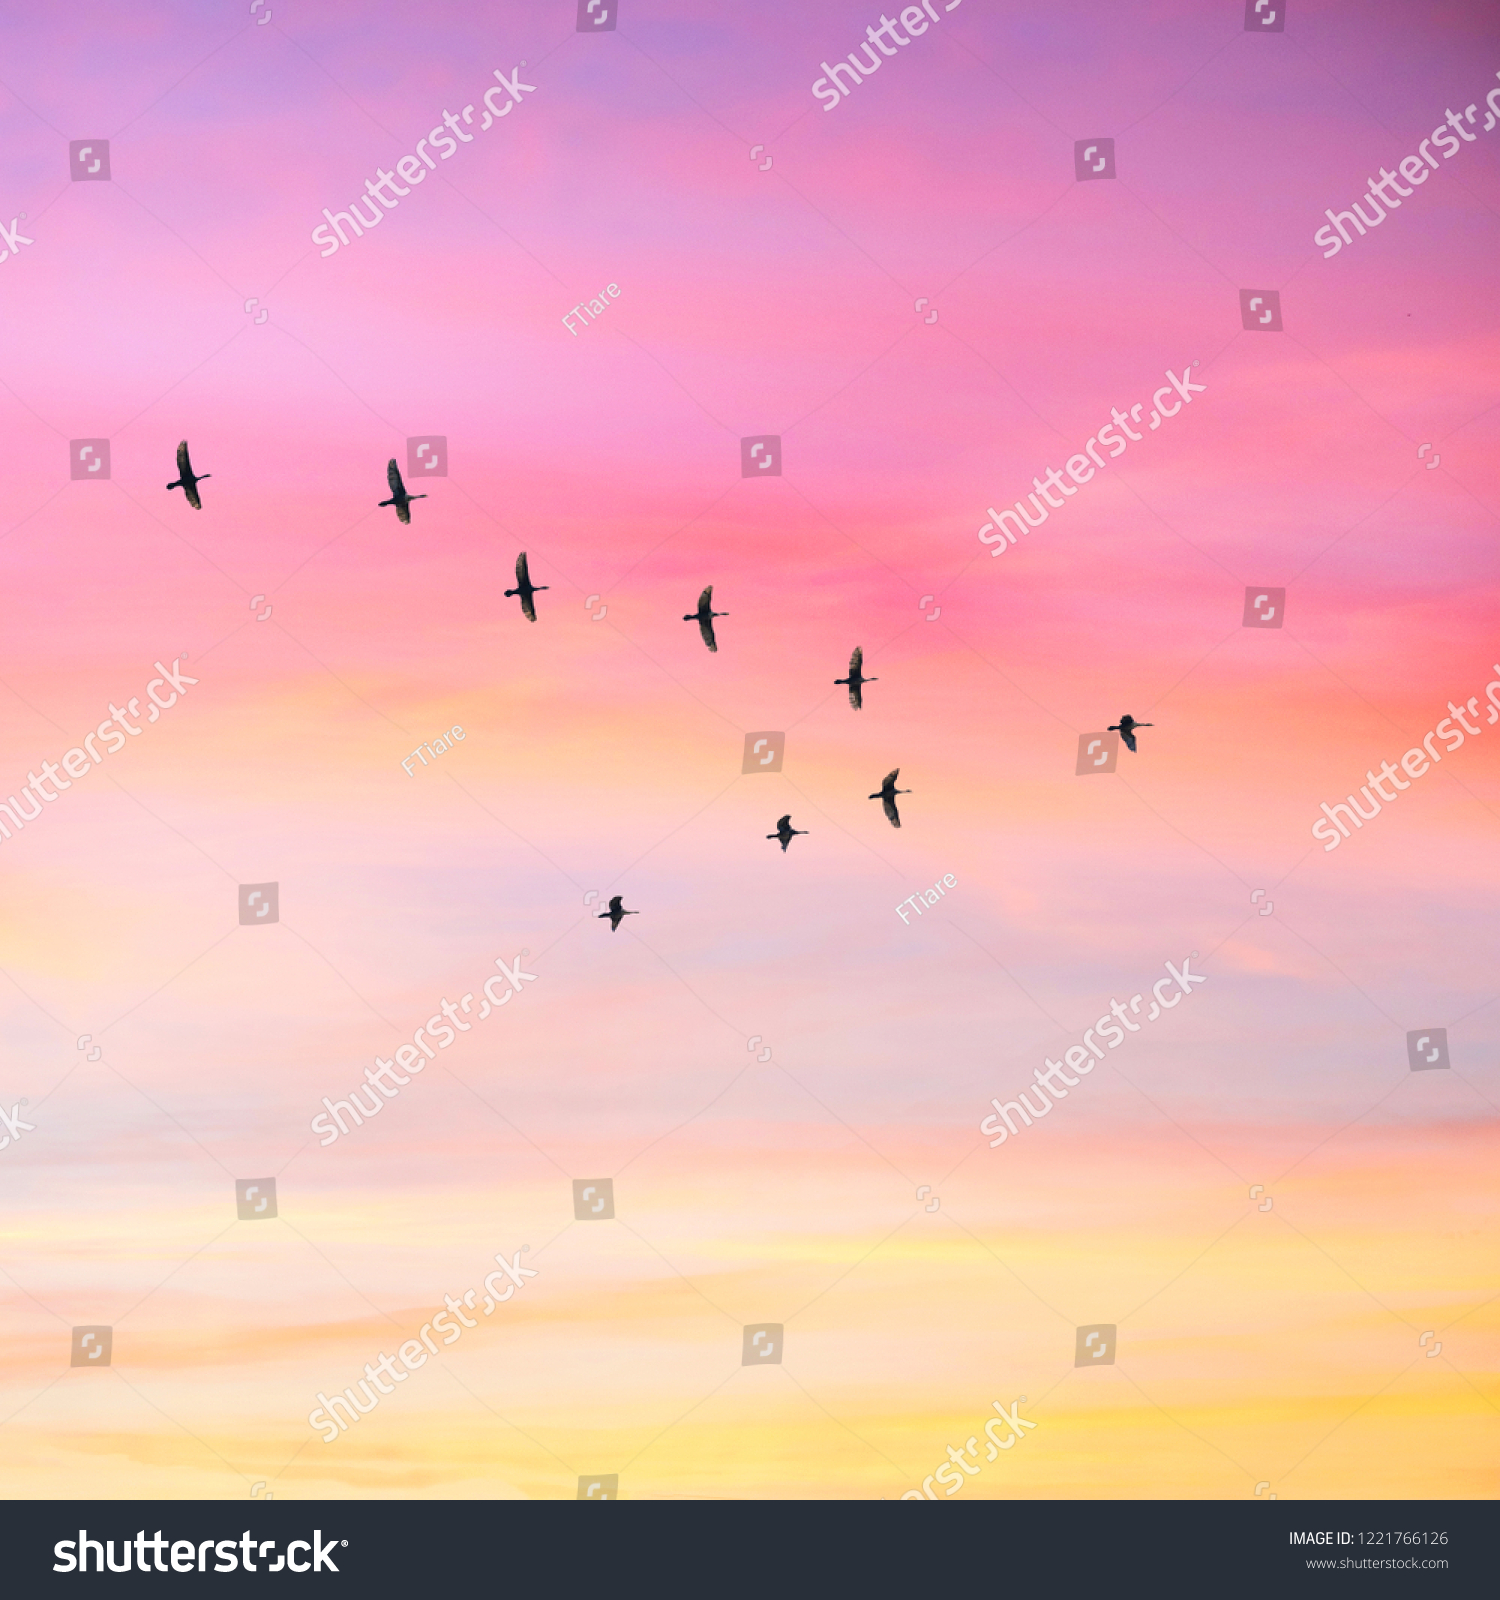 Migratory birds flying in the shape of v on the cloudy sunset sky. Sky and clouds with effect of pastel colored.   #1221766126